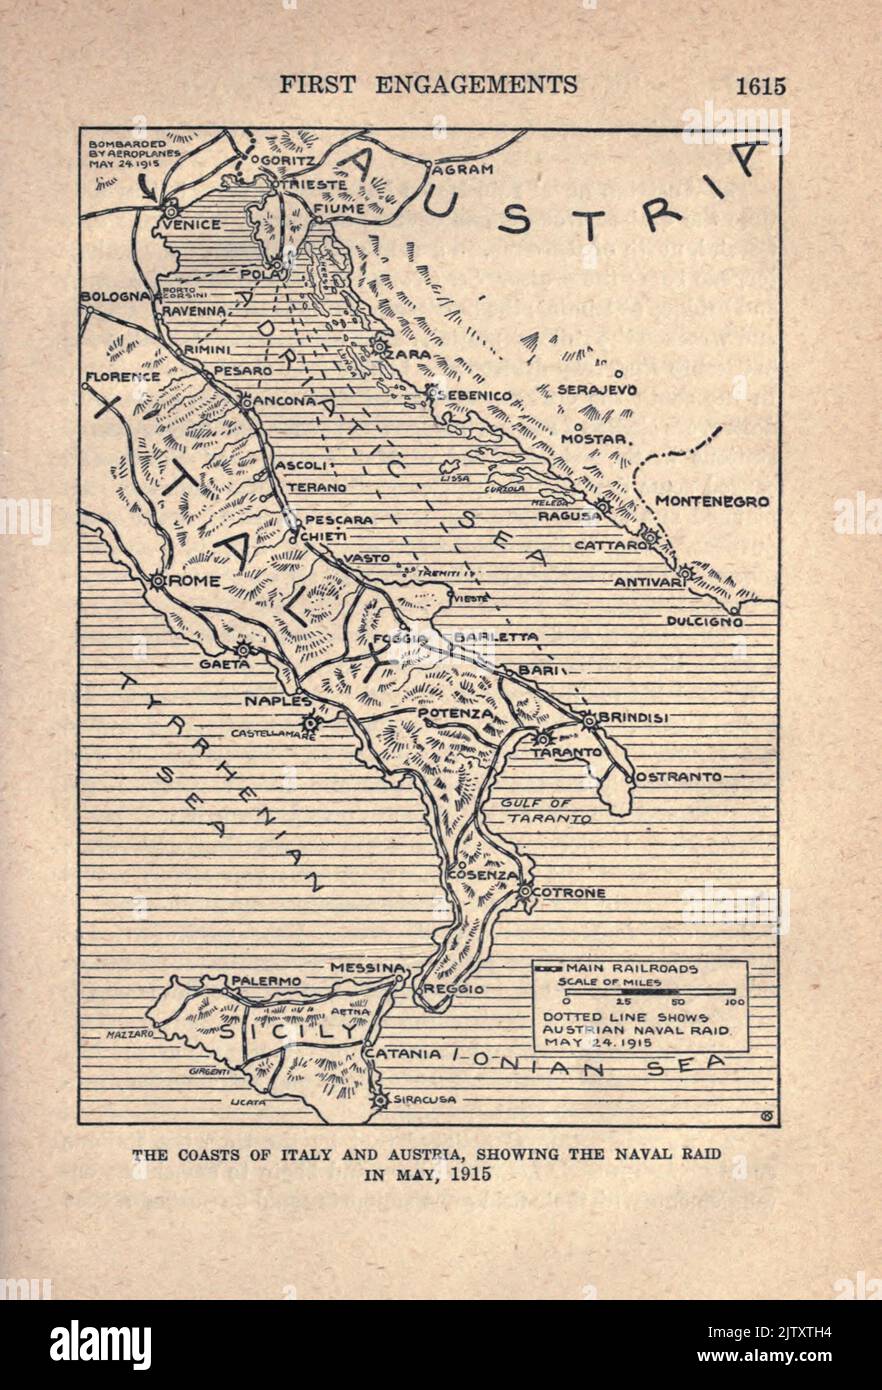 COASTS OF ITALY AND AUSTRIA, SHOWING THE NAVAL RAID IN MAY, 1915 from the book The story of the great war; the complete historical records of events to date DIPLOMATIC AND STATE PAPERS by Reynolds, Francis Joseph, 1867-1937; Churchill, Allen Leon; Miller, Francis Trevelyan, 1877-1959; Wood, Leonard, 1860-1927; Knight, Austin Melvin, 1854-1927; Palmer, Frederick, 1873-1958; Simonds, Frank Herbert, 1878-; Ruhl, Arthur Brown, 1876-  Published 1920 Stock Photo